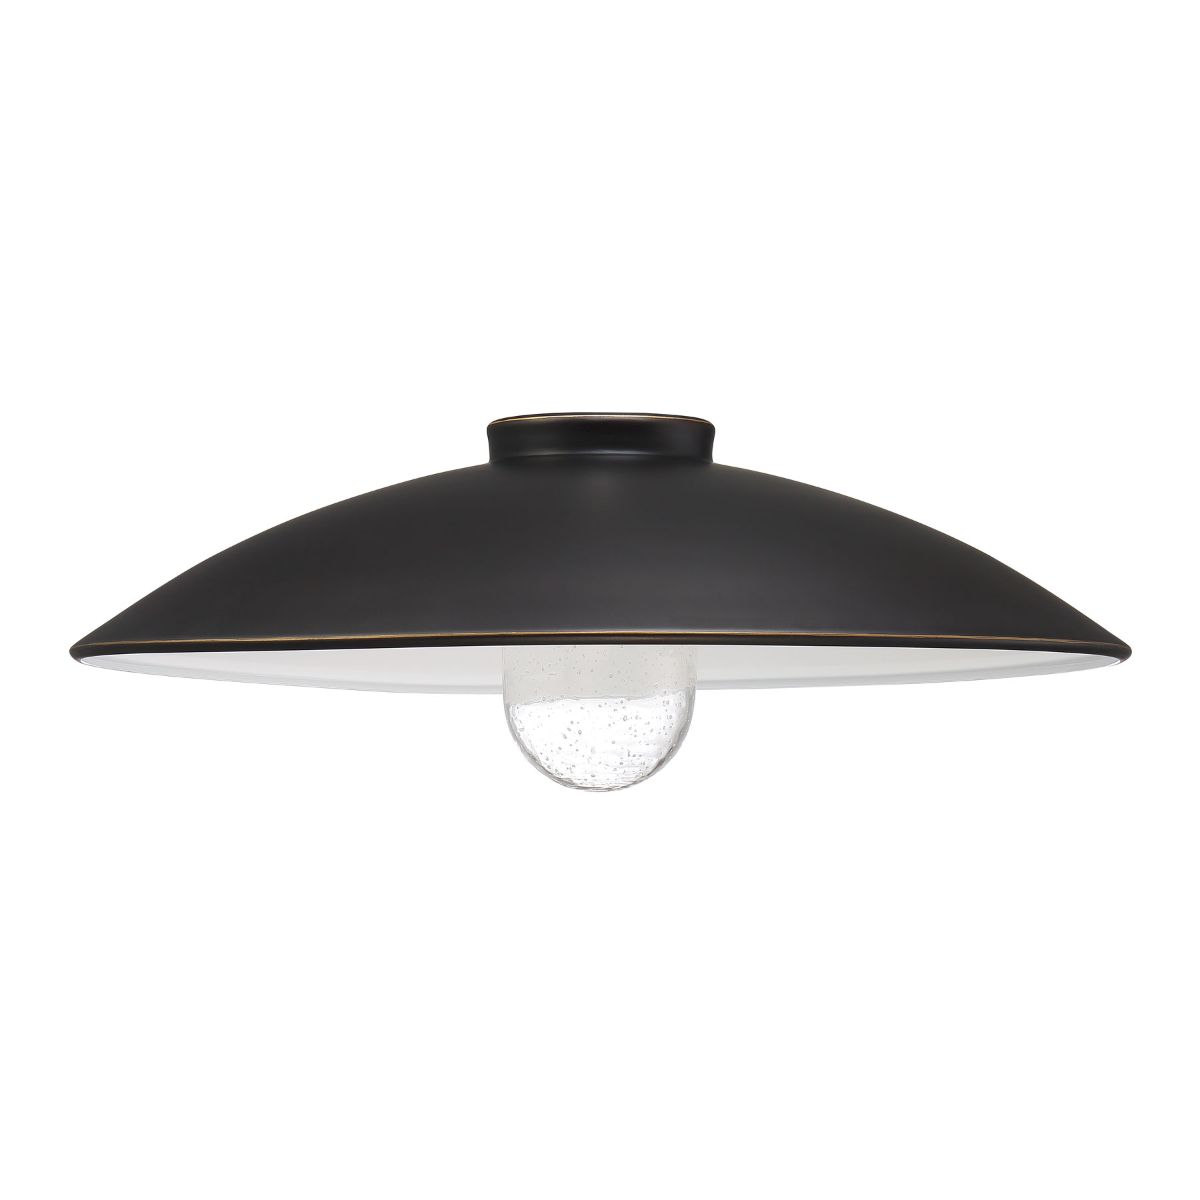 RLM 18 in. Path Light Shade Oil Rubbed Bronze finish - Bees Lighting